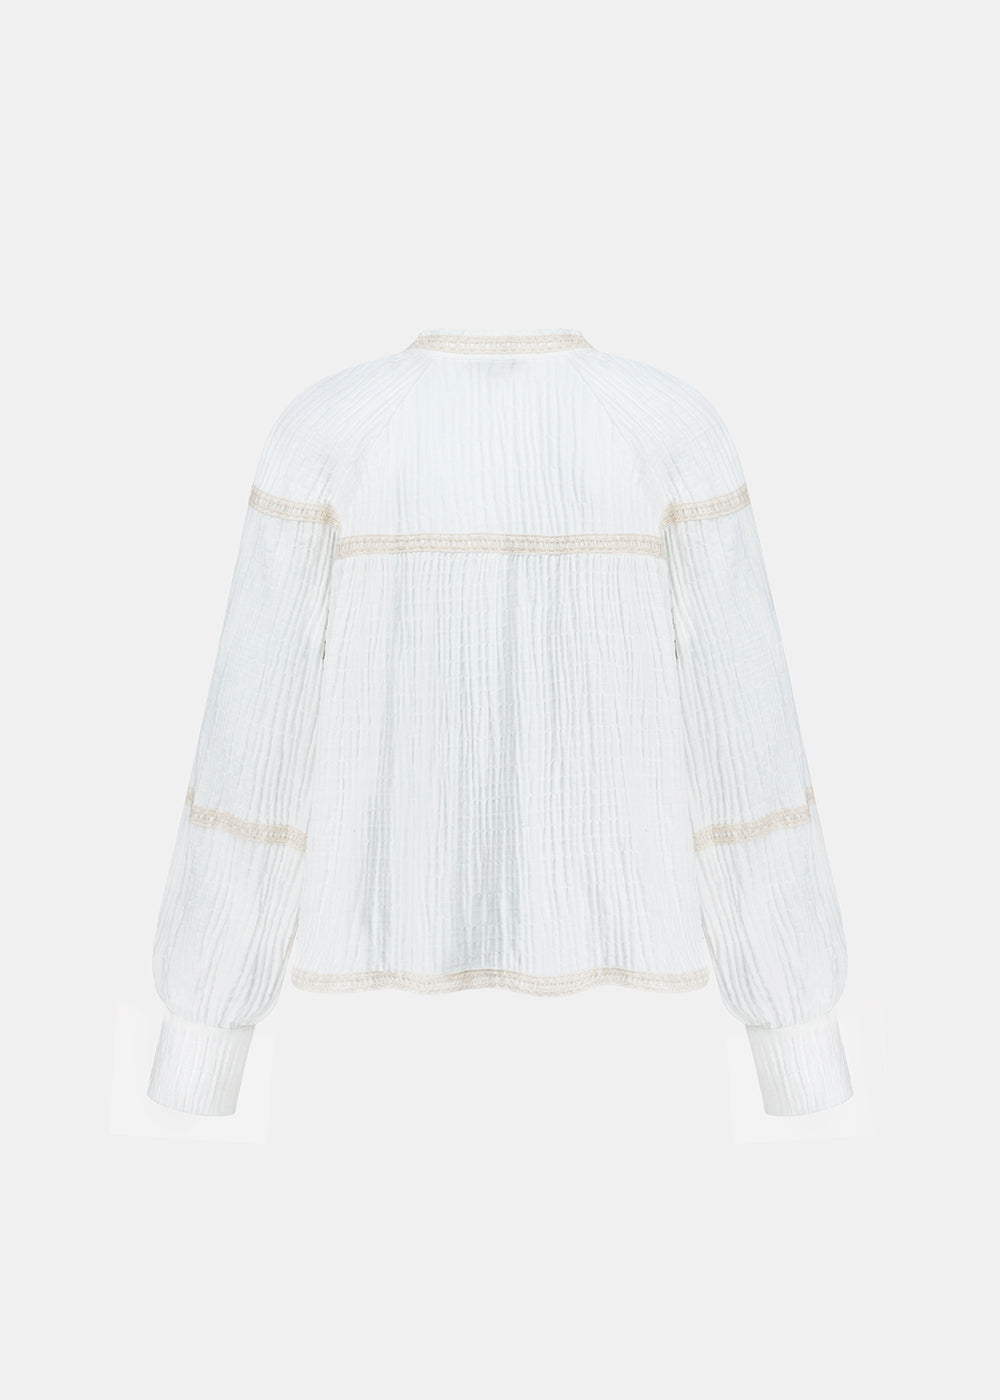 WAVE SHIRT OFF WHITE